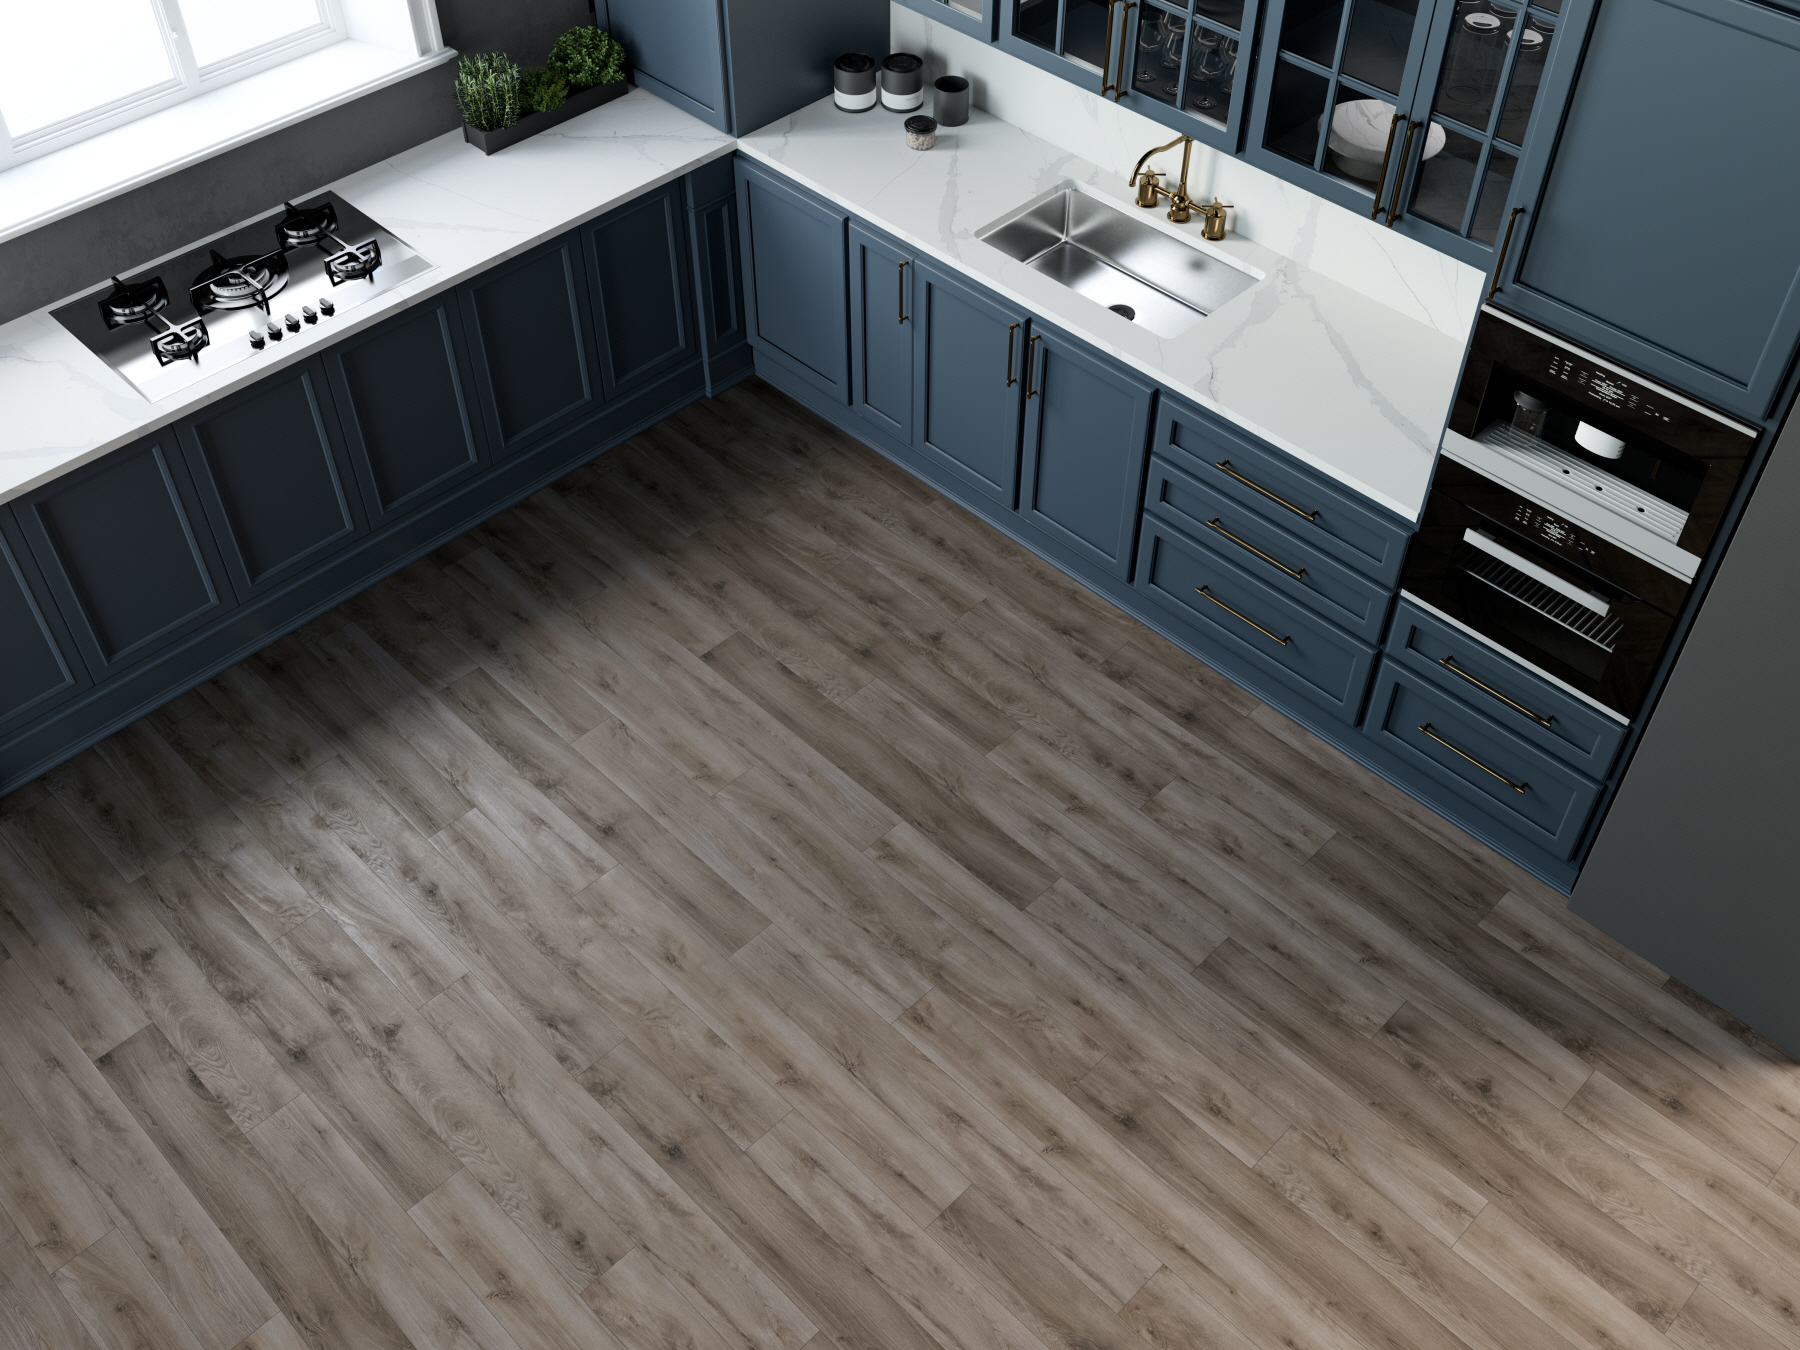 Top rated Vinyl Plank Flooring For Your Home_HFLOR